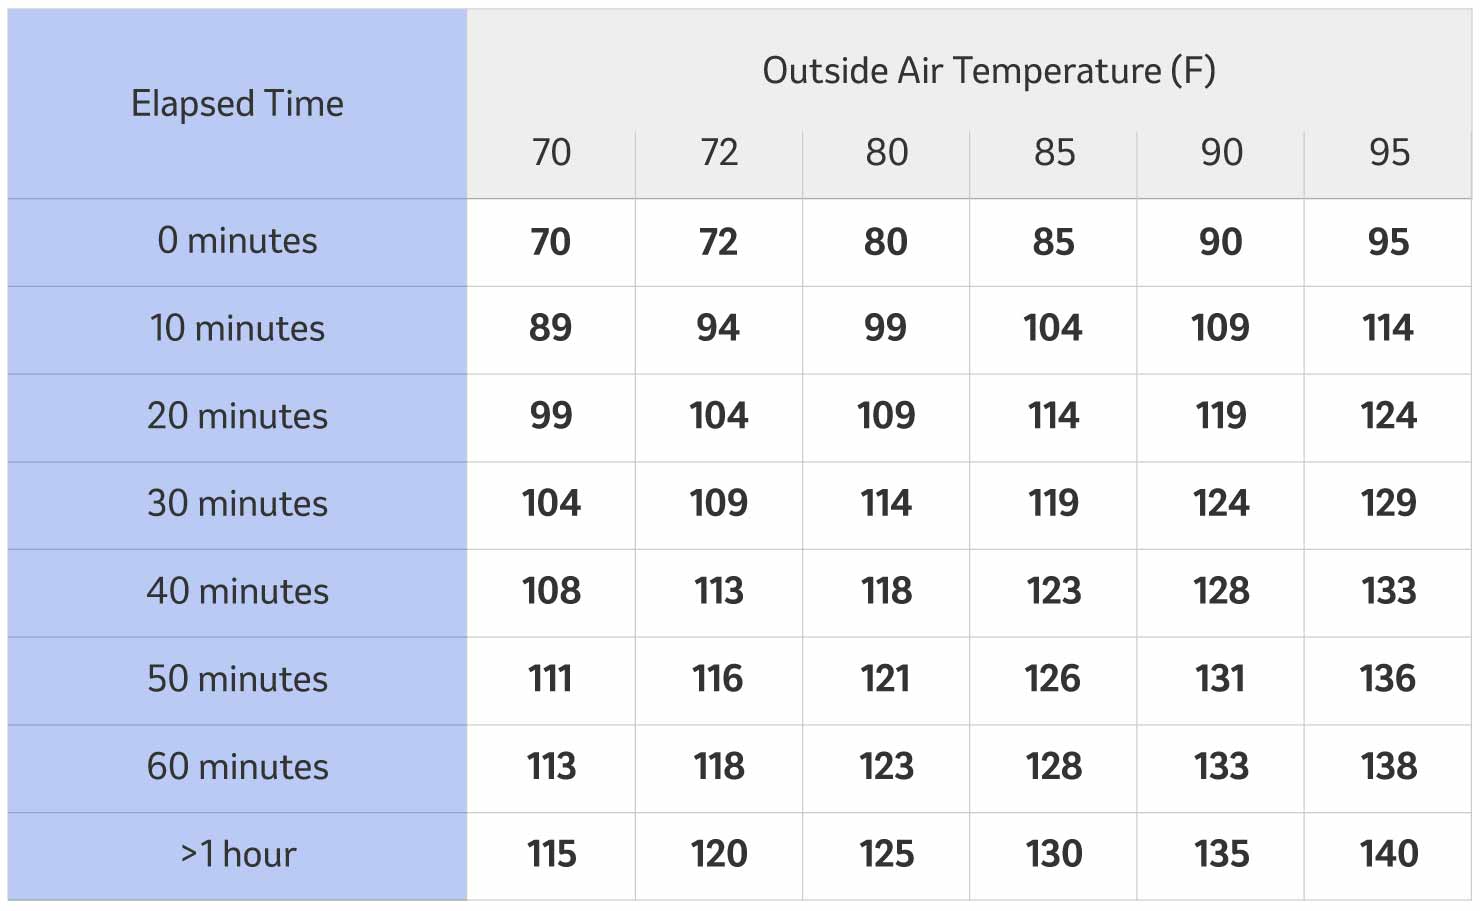 Table showing air temperatures in a closed vehicle relative to outdoor temperatures